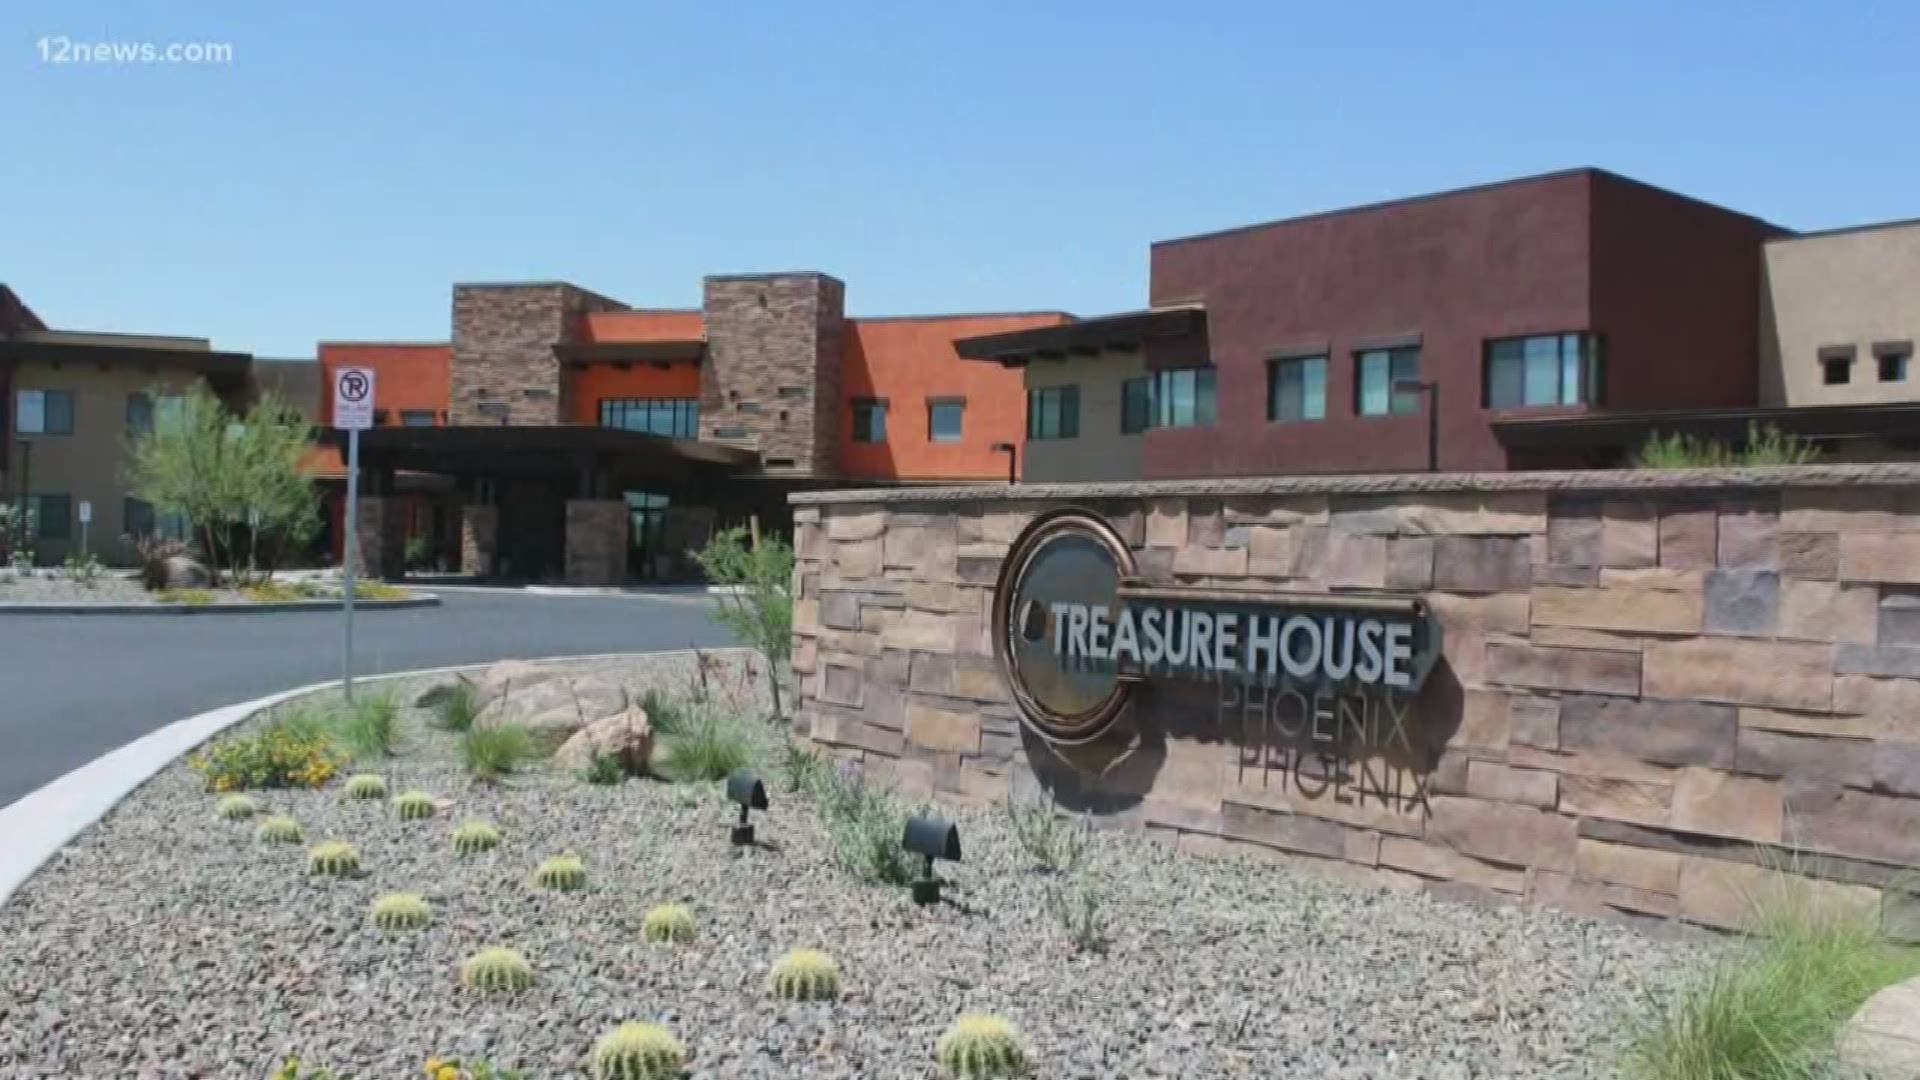 Kurt and Brenda Warner wanted a place for their oldest son, who is developmentally disabled and legally blind, to be able to flourish. So, they built Treasure House, which now houses six residents with plans to expand.